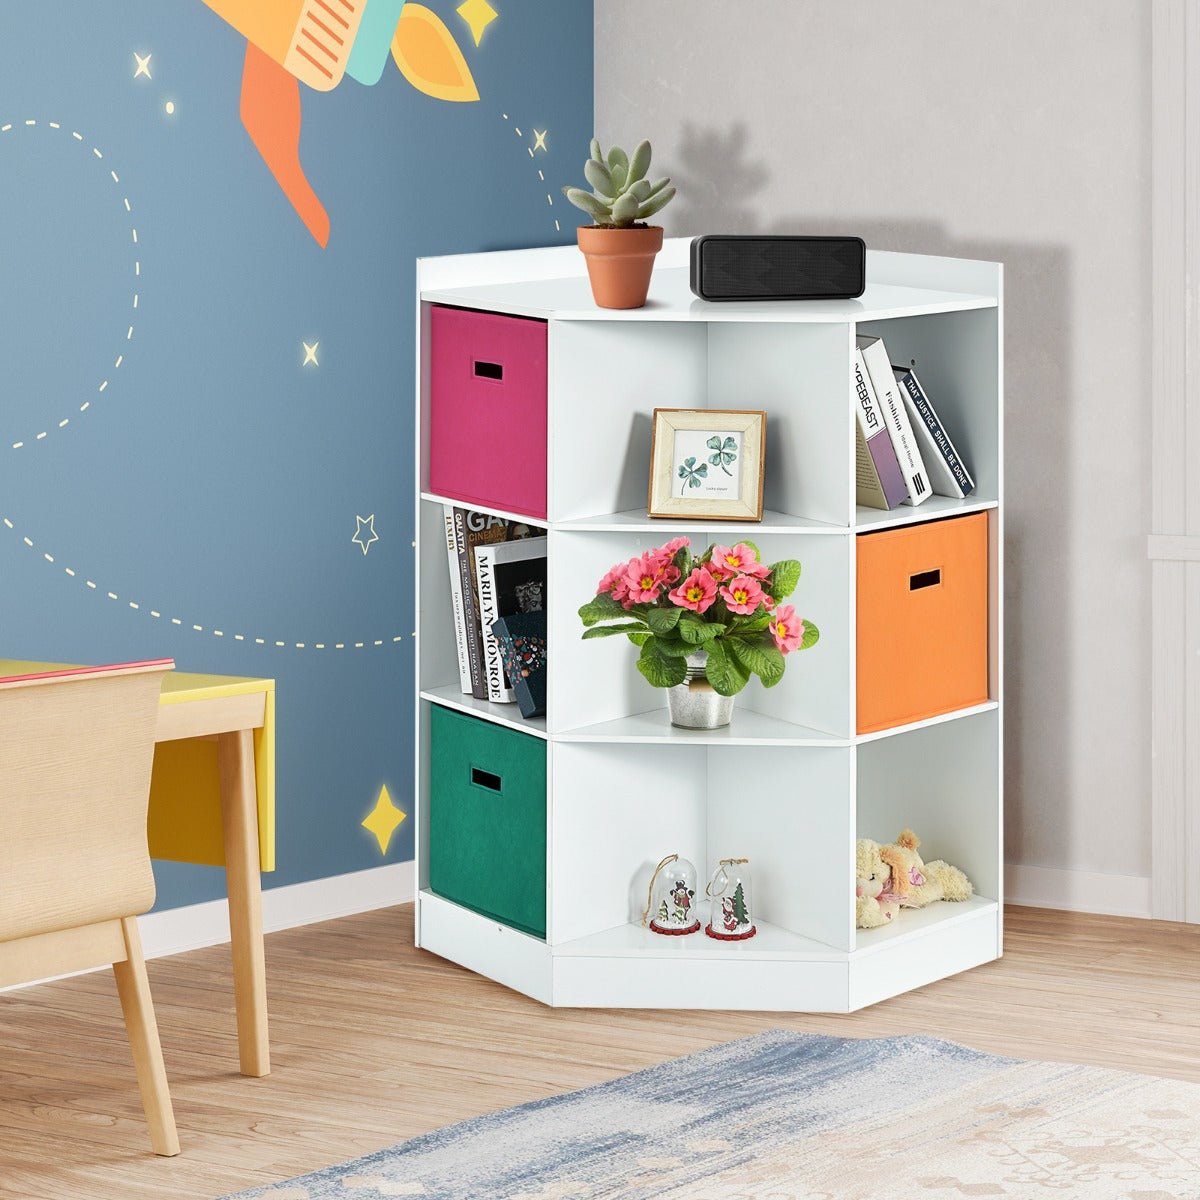 Buy the Ultimate Toy Storage Organizer for Clutter-Free Play